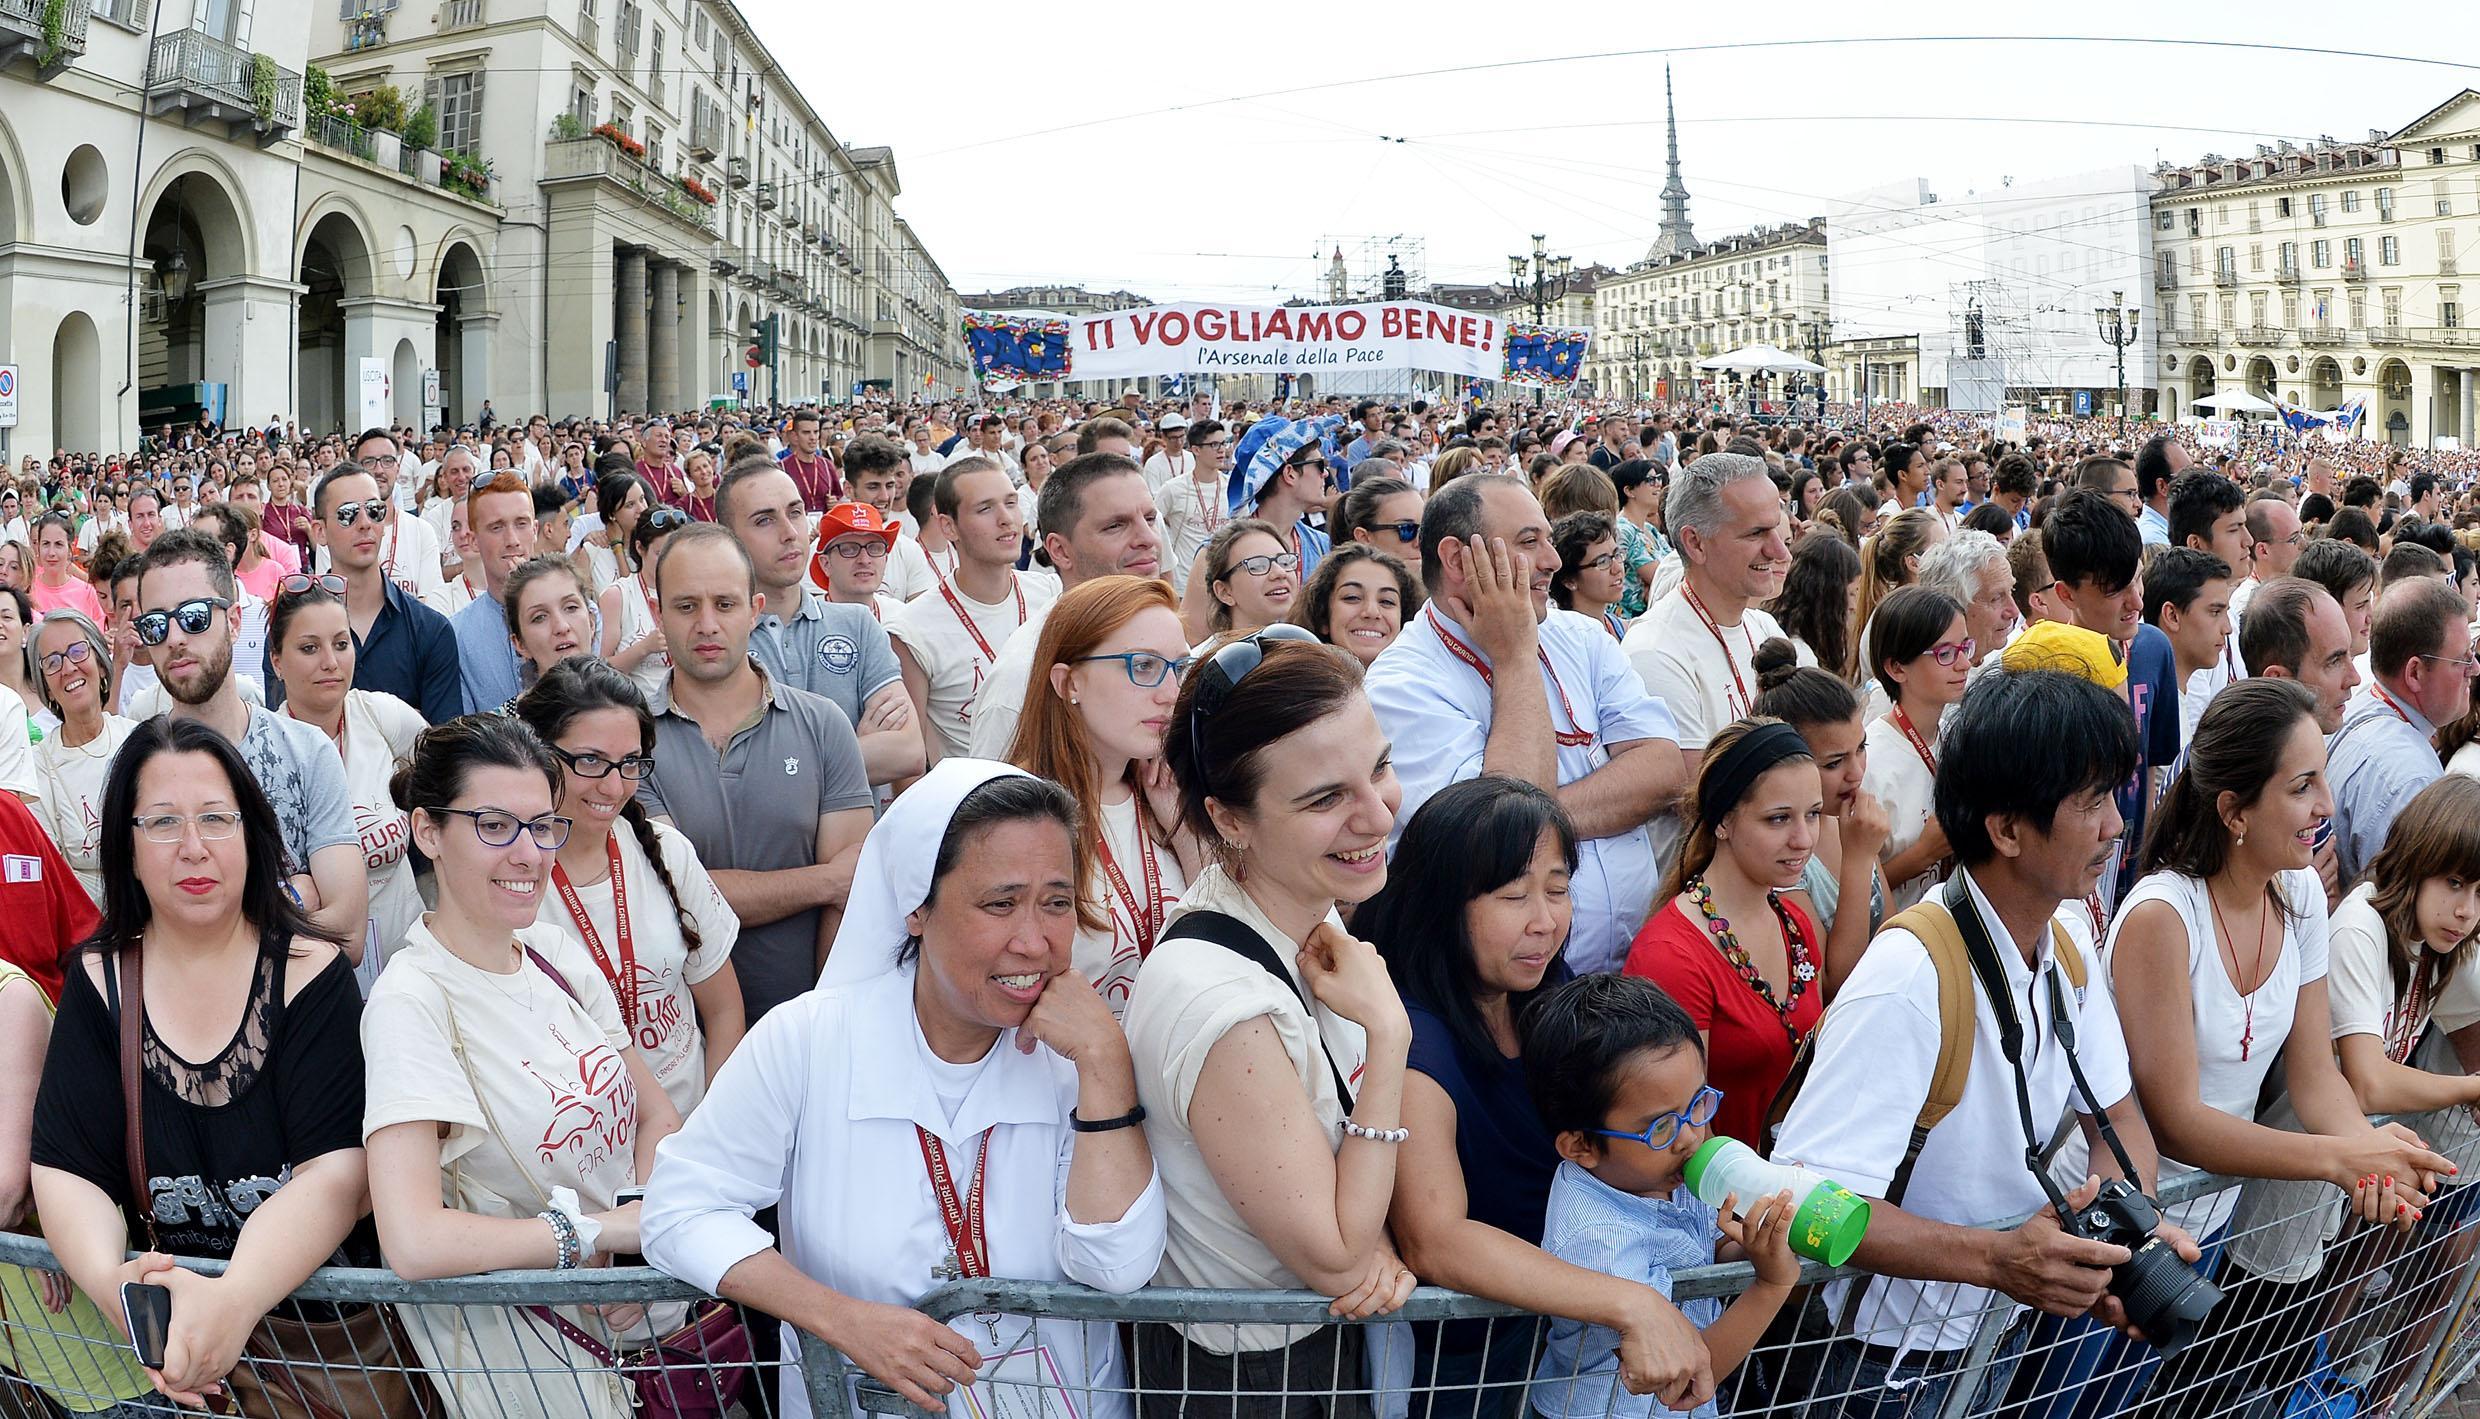 Pope Francis' meeting with youth in Piazza Vittorio Veneto in Turin